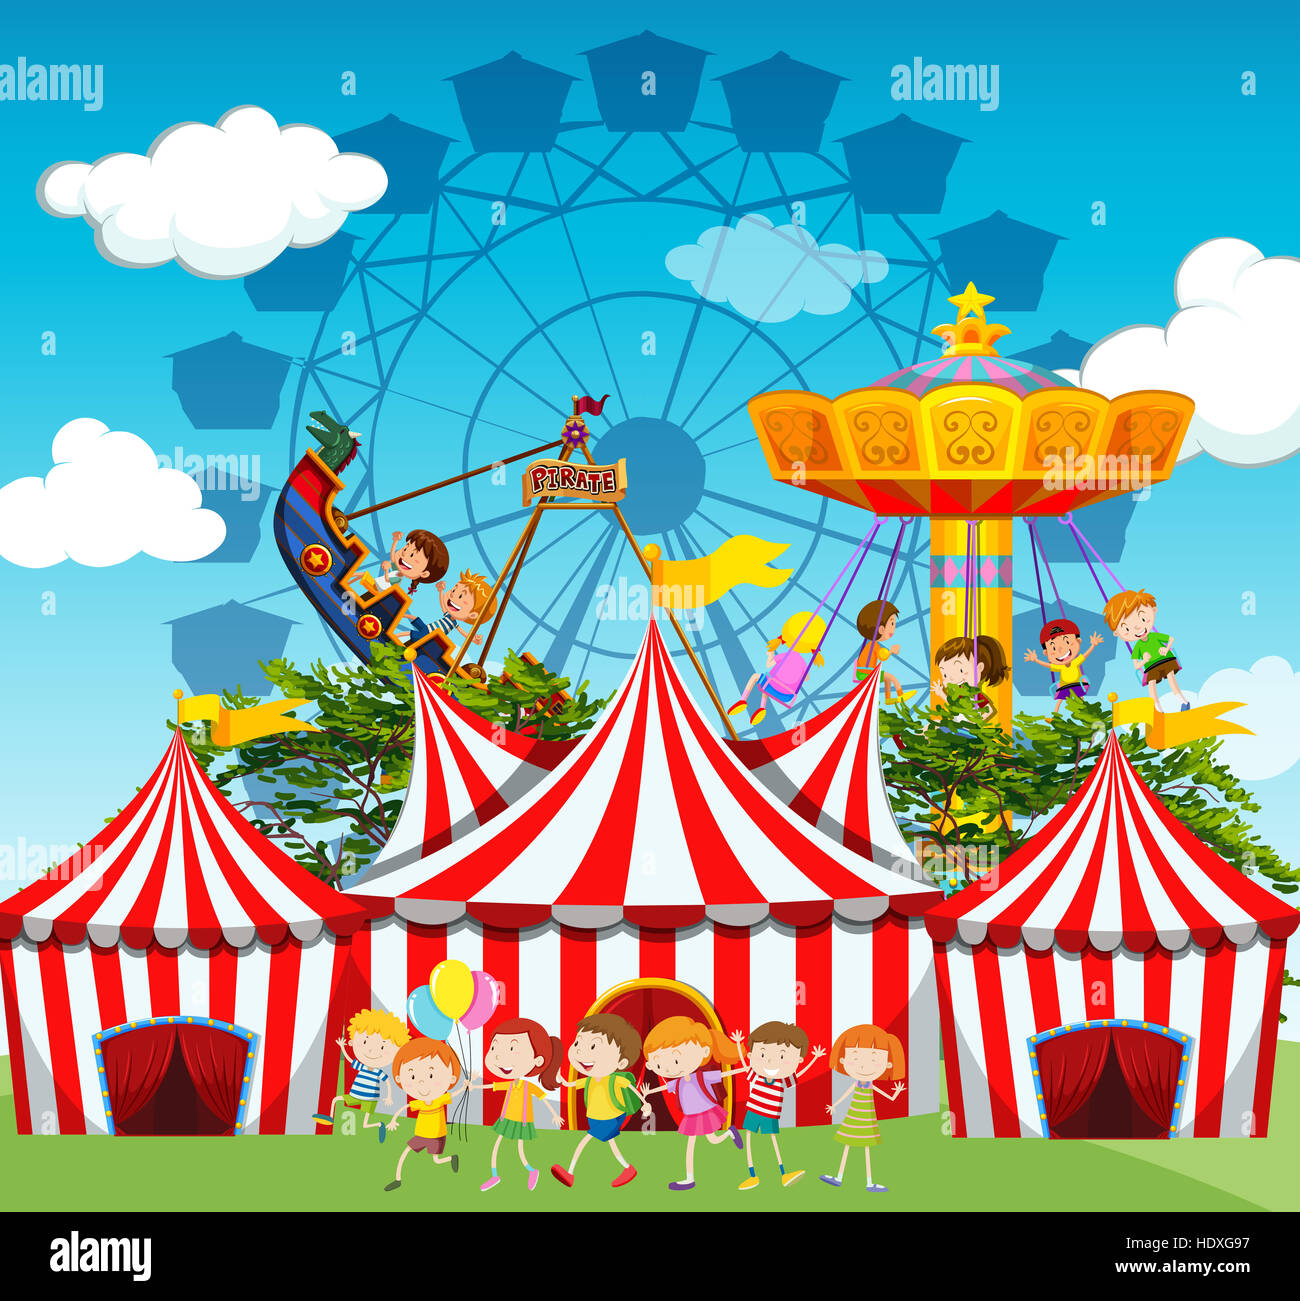 Circus scene with children and rides illustration Stock Photo